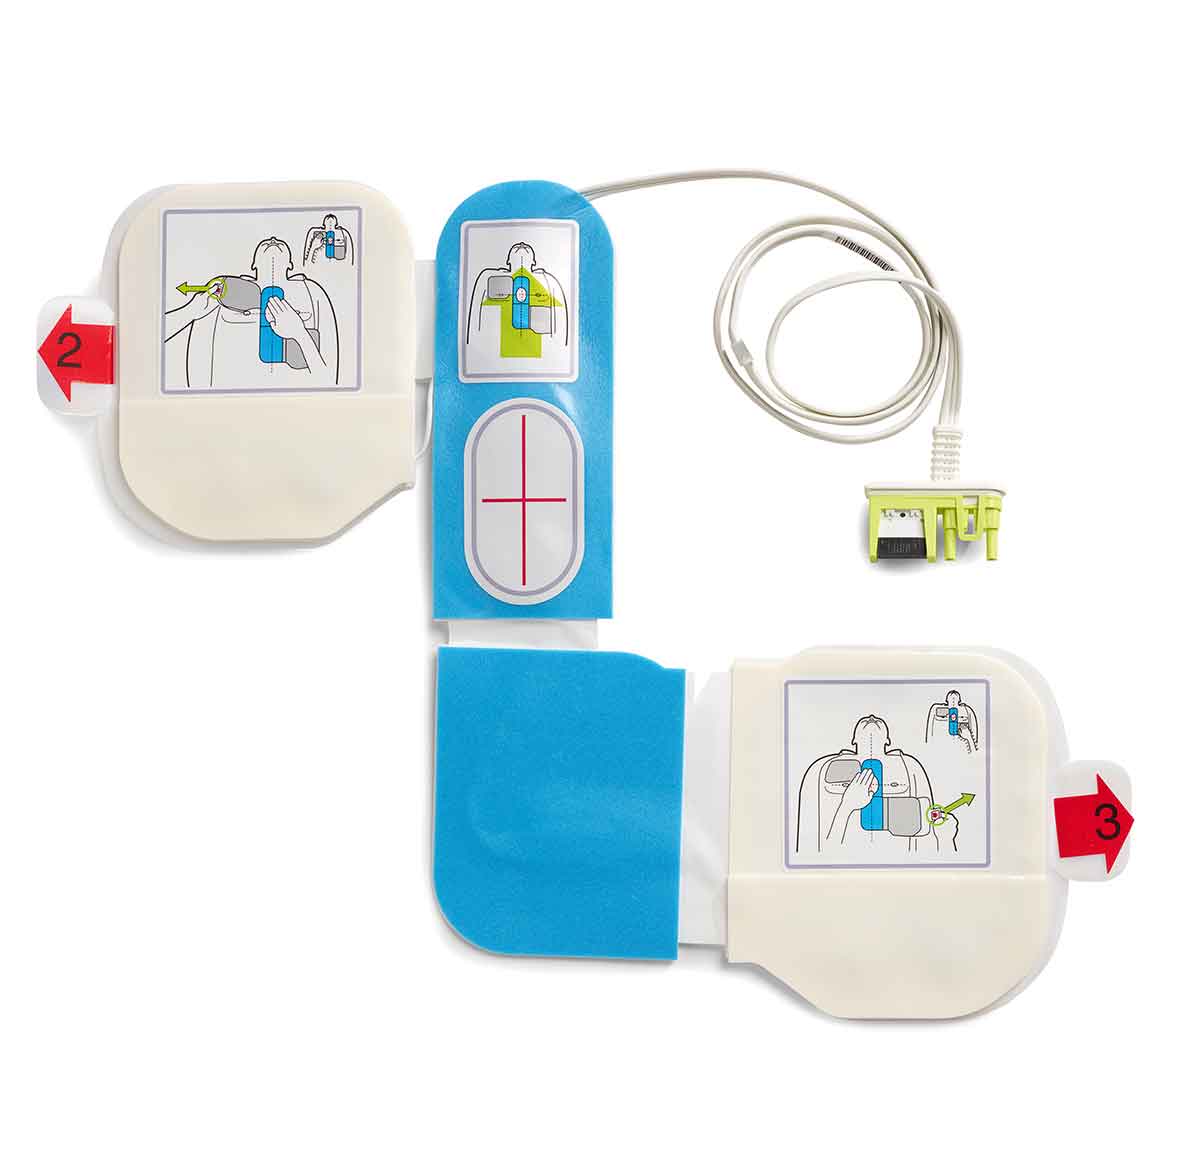 CPR-D-padz Electrodes for AEDs - ZOLL Medical